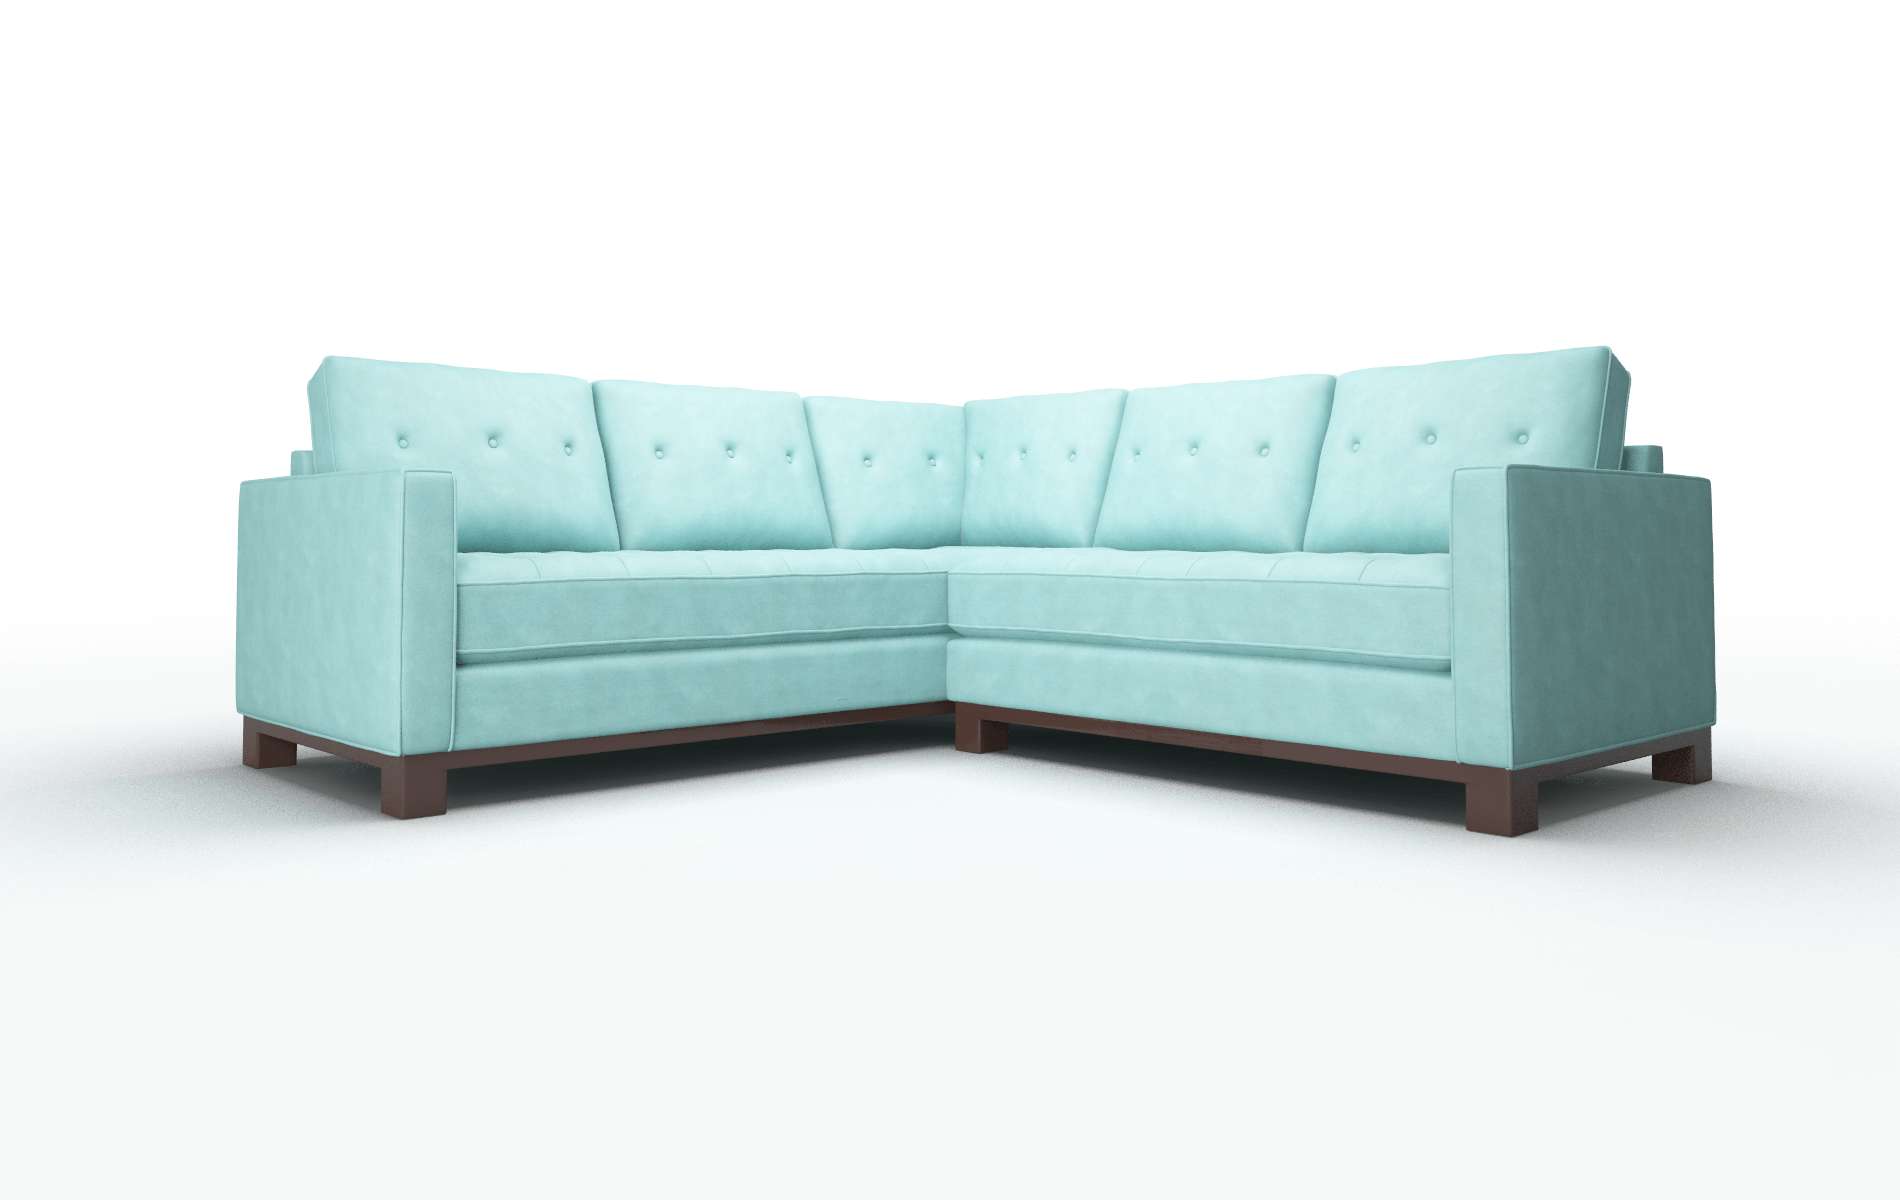 Syros Curious Turquoise Sectional espresso legs 1